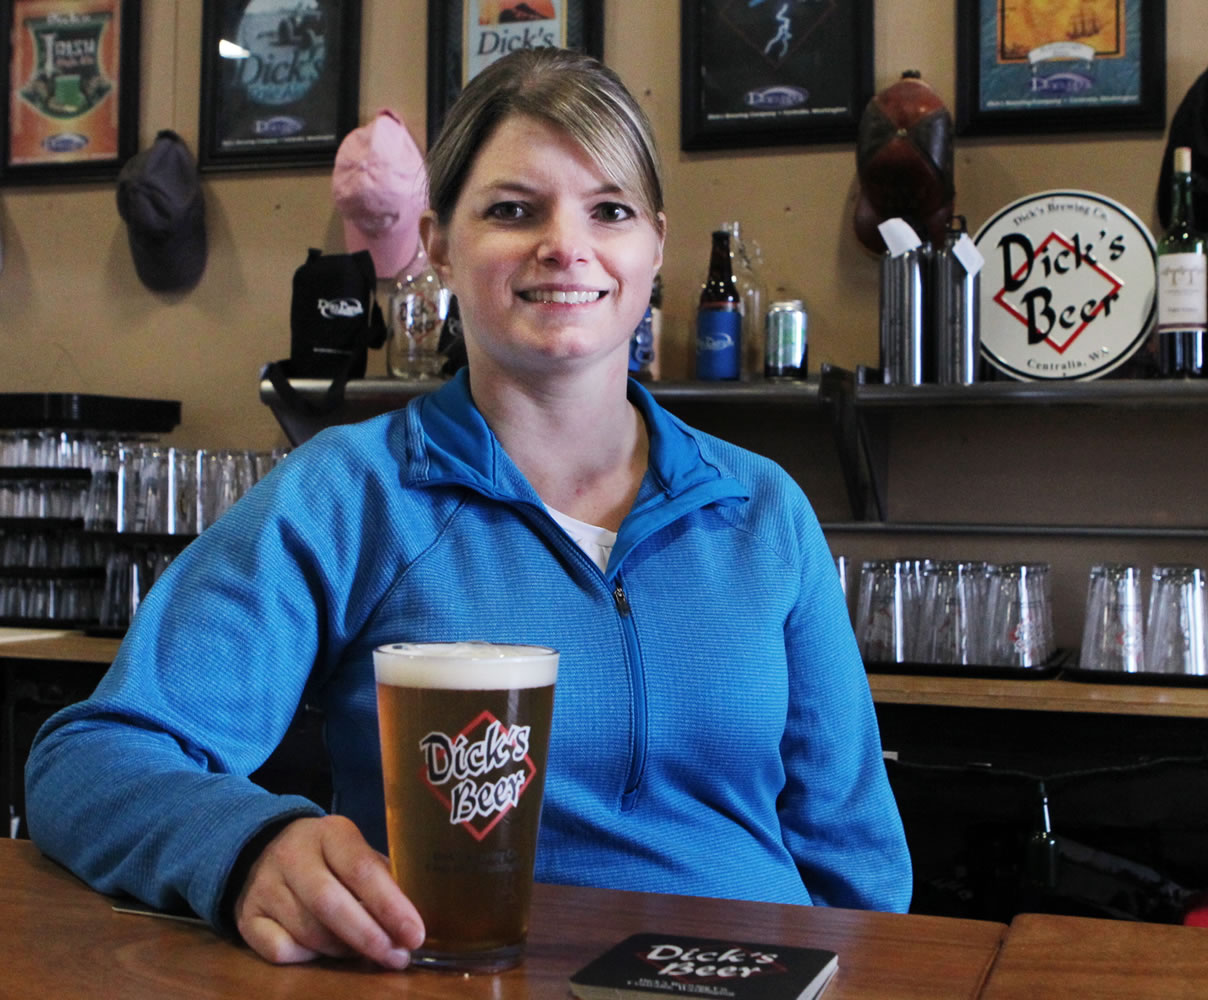 As the Seattle Seahawks prepare for Super Bowl XLVIII, Centralia-based Dick's Brewing owner Julie Young-Pendleton said her microbrewery is scoring big with a beer made just for fans.